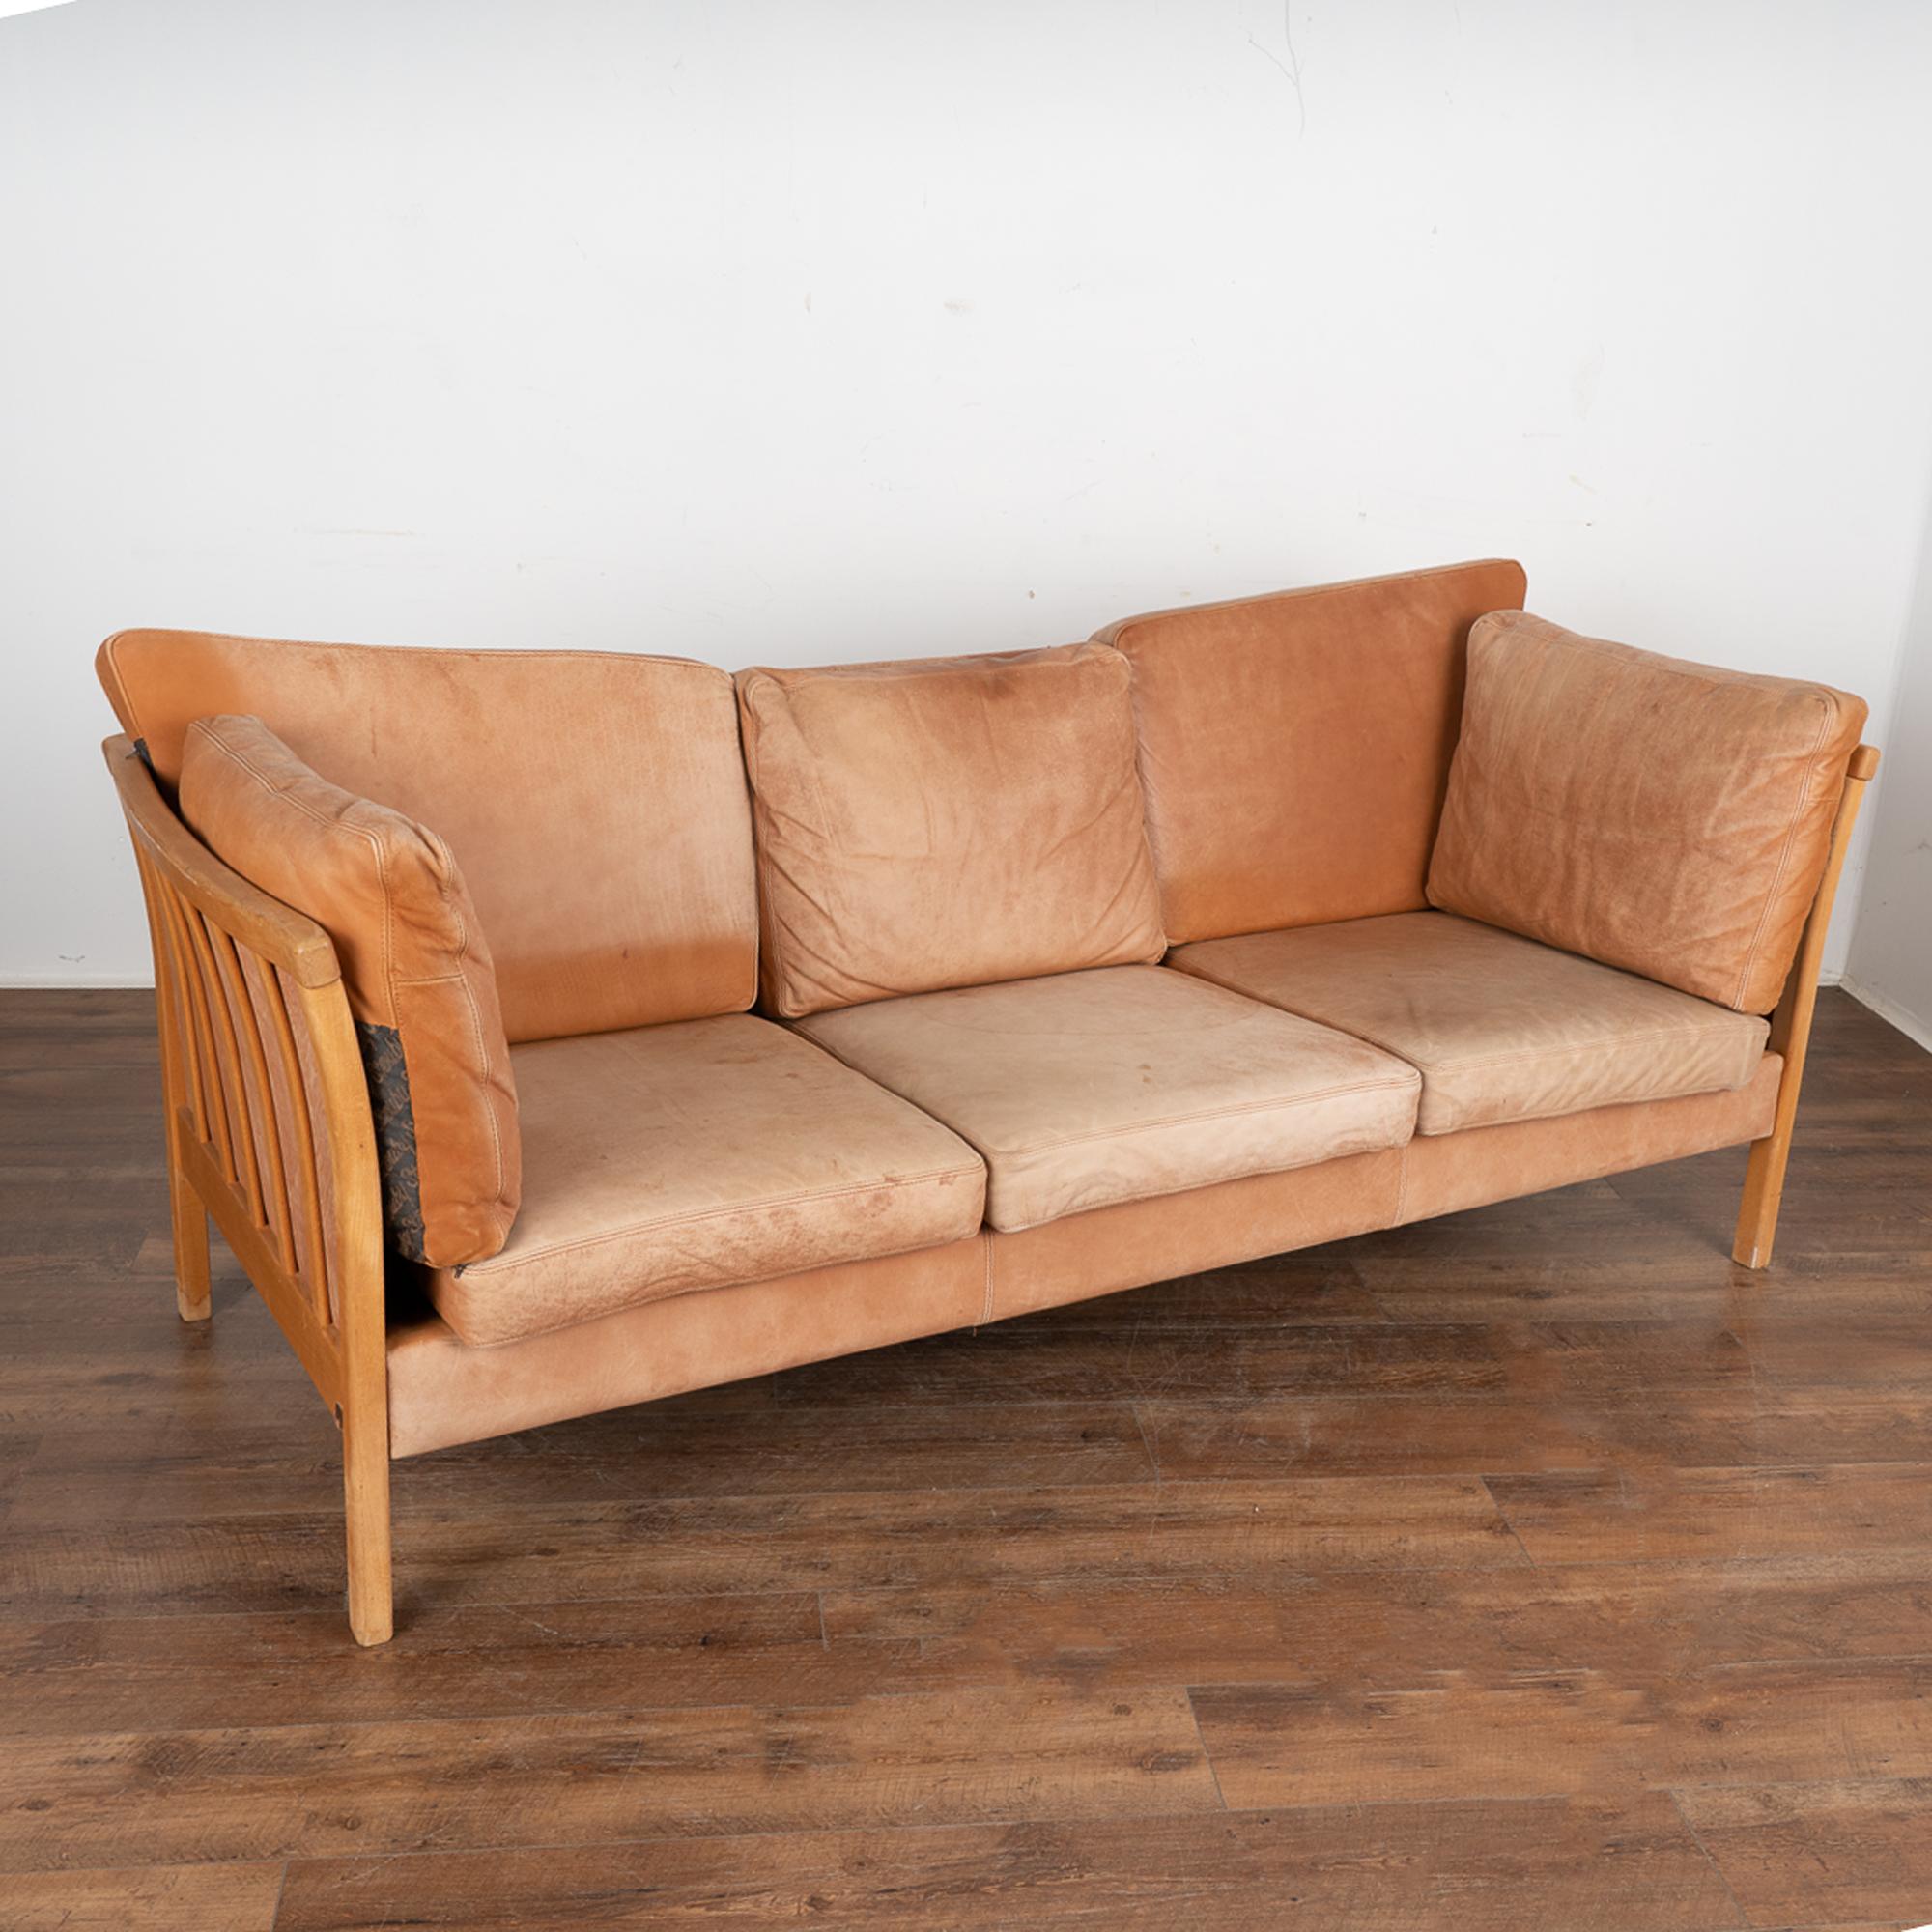 Mid-Century Modern Stouby three-seat sofa with removable cushions, frame in beech.
The years of use are revealed in the aged patina of the leather, including impressions, scuffs/scratches, stains, fading/discoloration throughout, etc. which all add